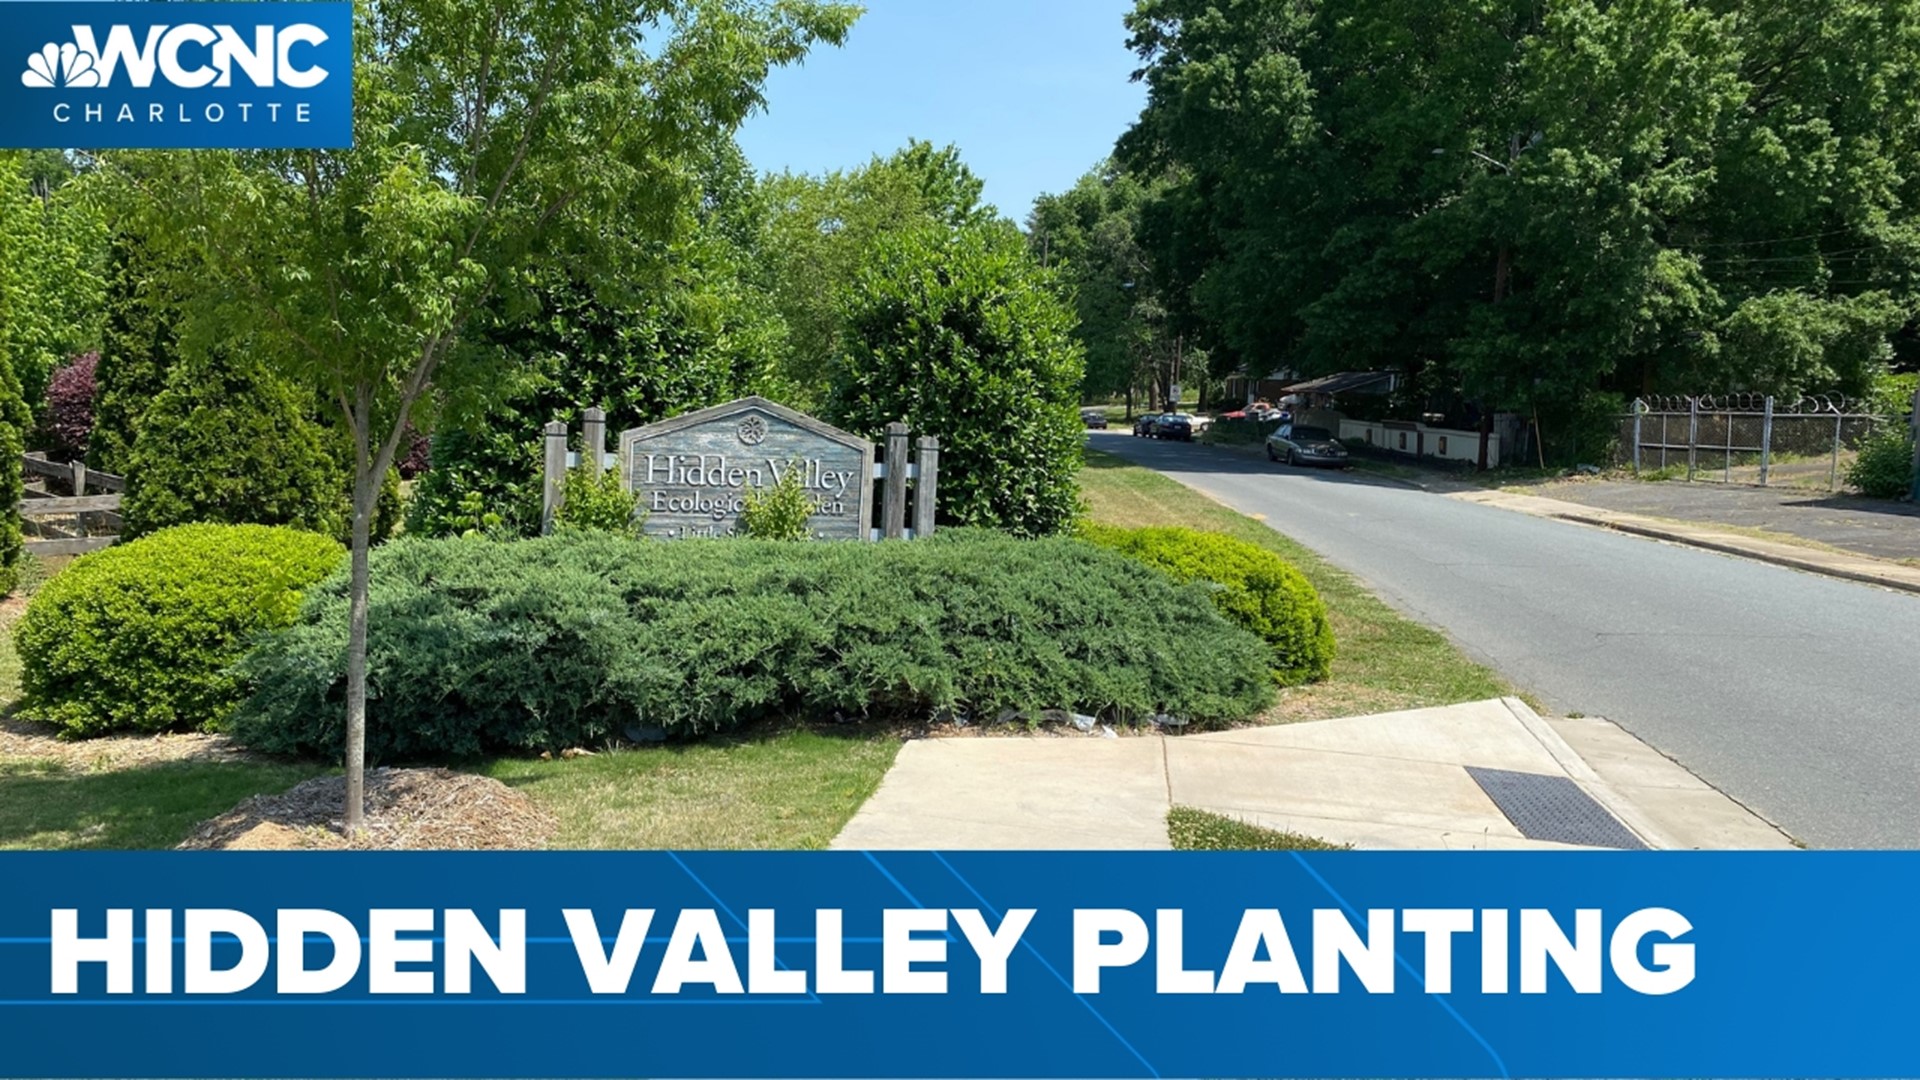 A wildlife beautification project is underway in Charlotte's Hidden Valley neighborhood to make the area more attractive to visitors.